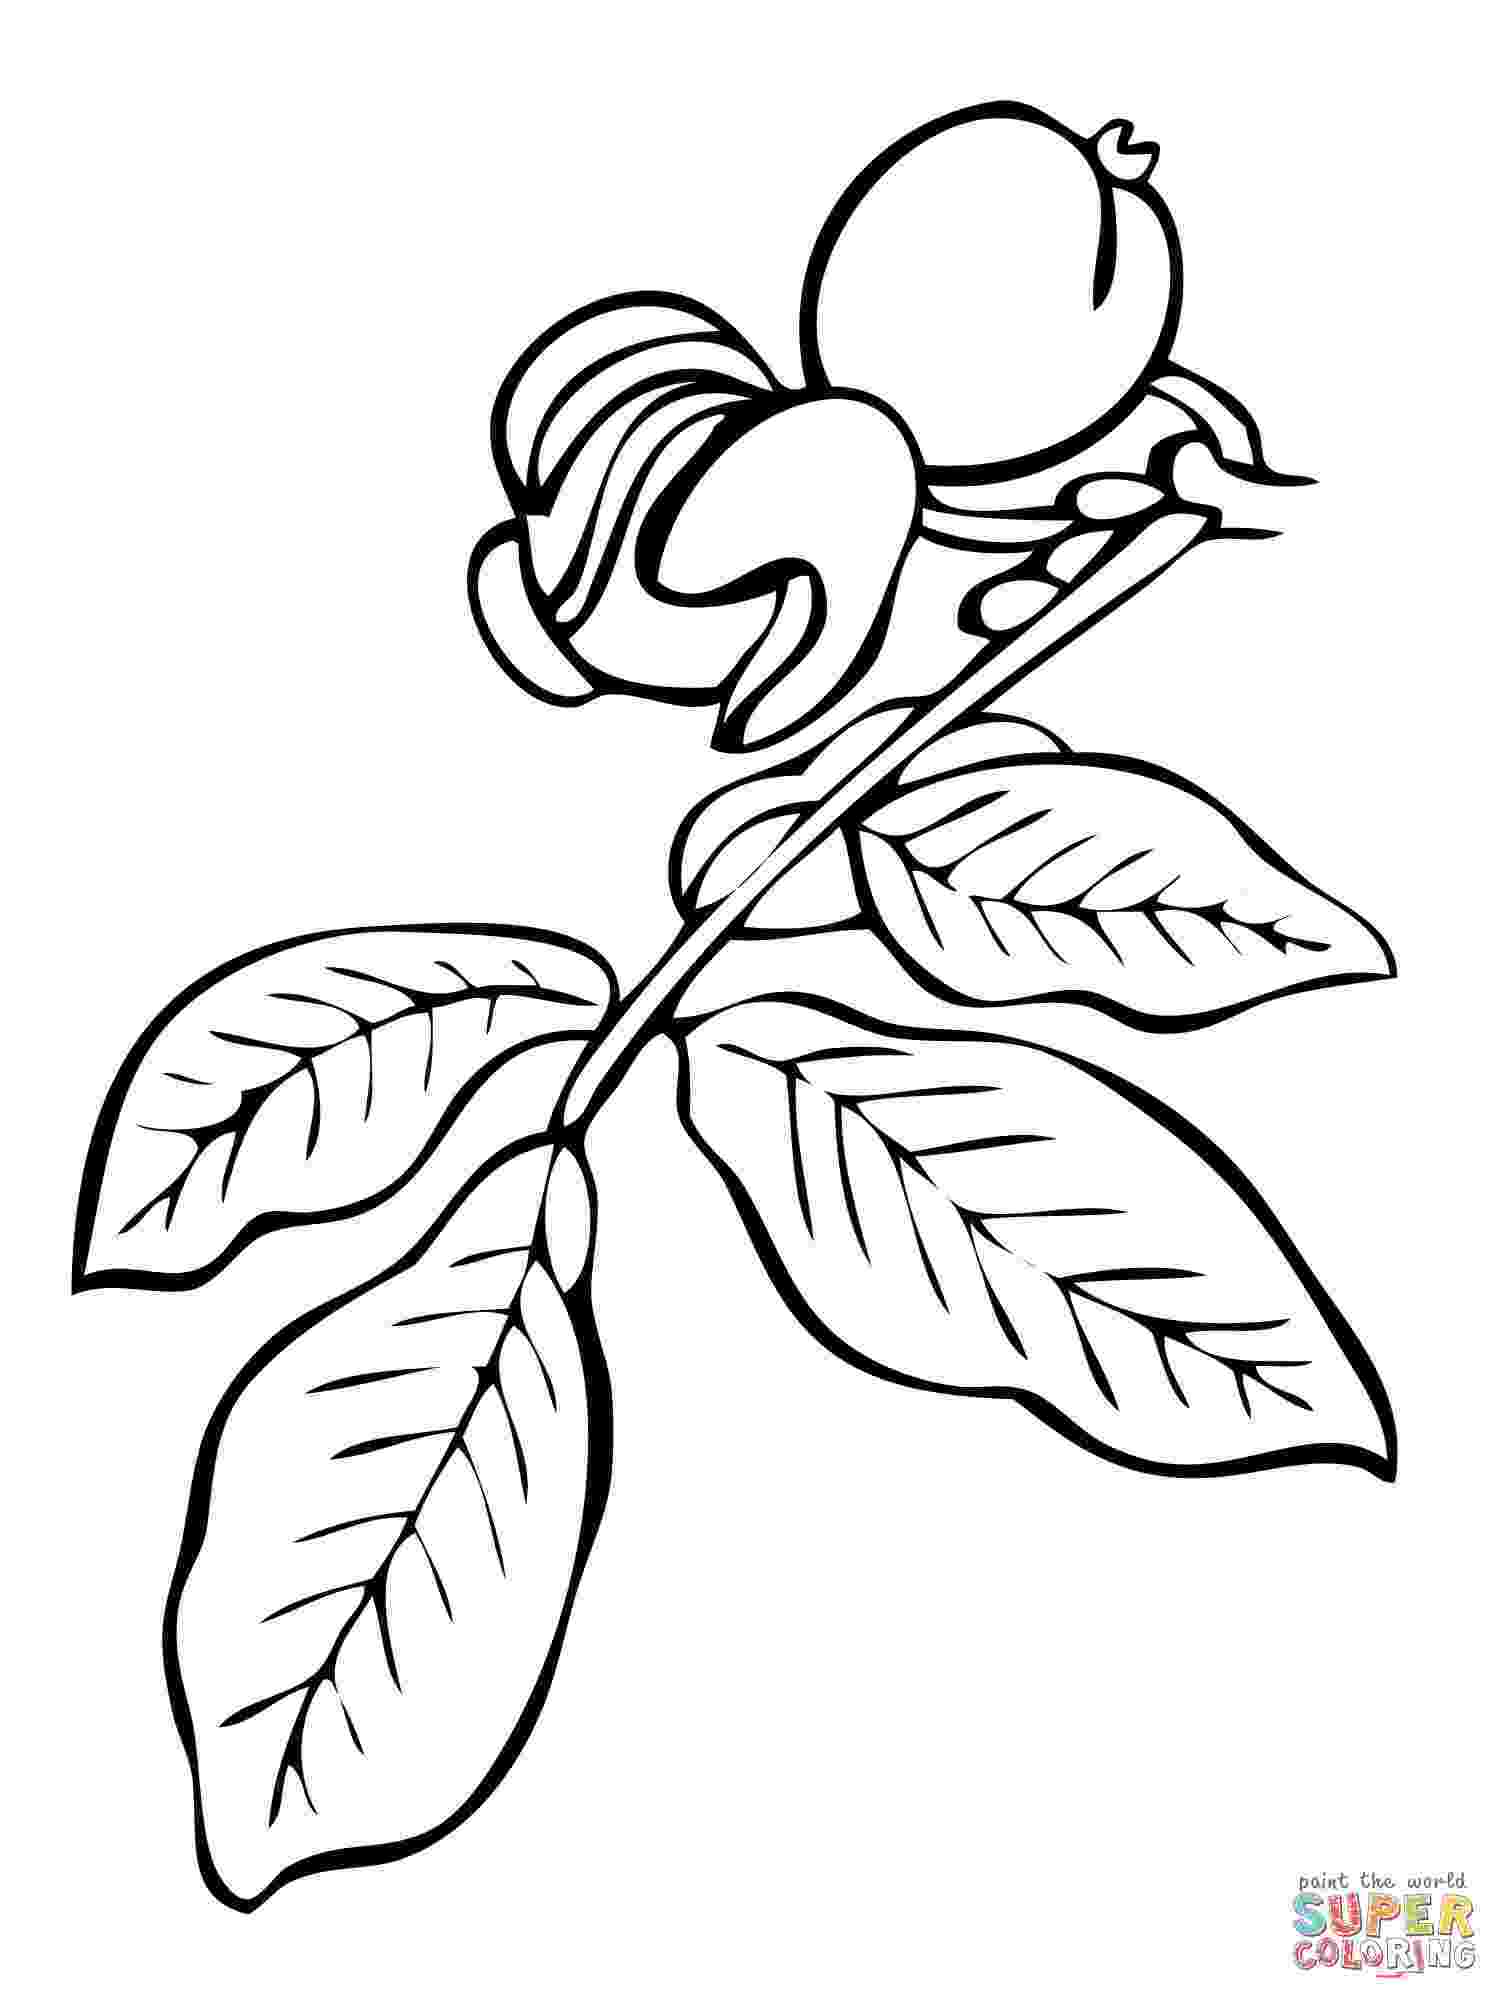 branch coloring page apples on the tree branch coloring page tree pinterest branch page coloring 